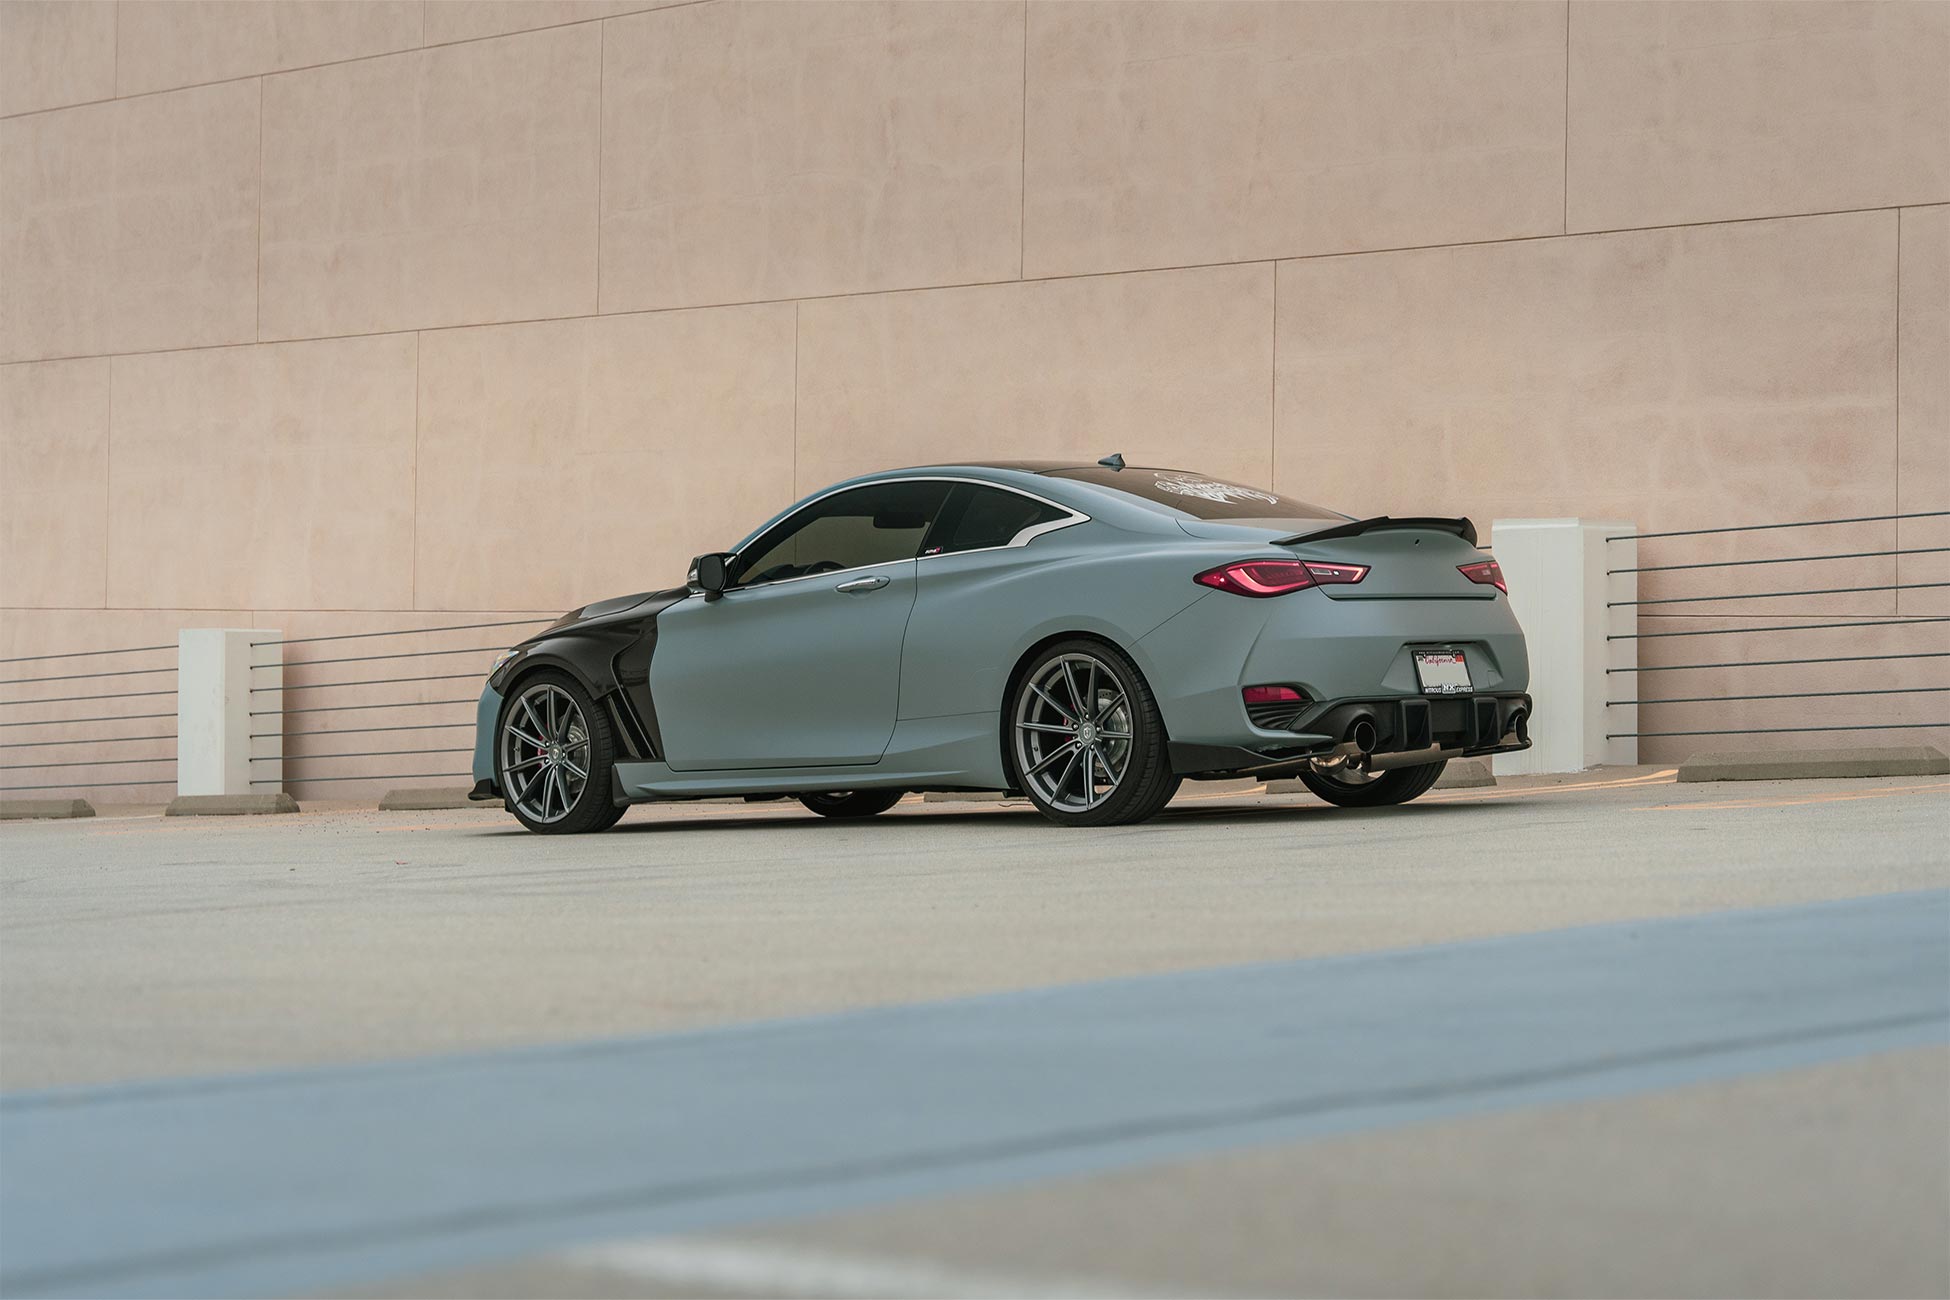 A modified Infiniti Q60 with carbon fiber front fenders and Curva Concepts C46 aftermarket wheels